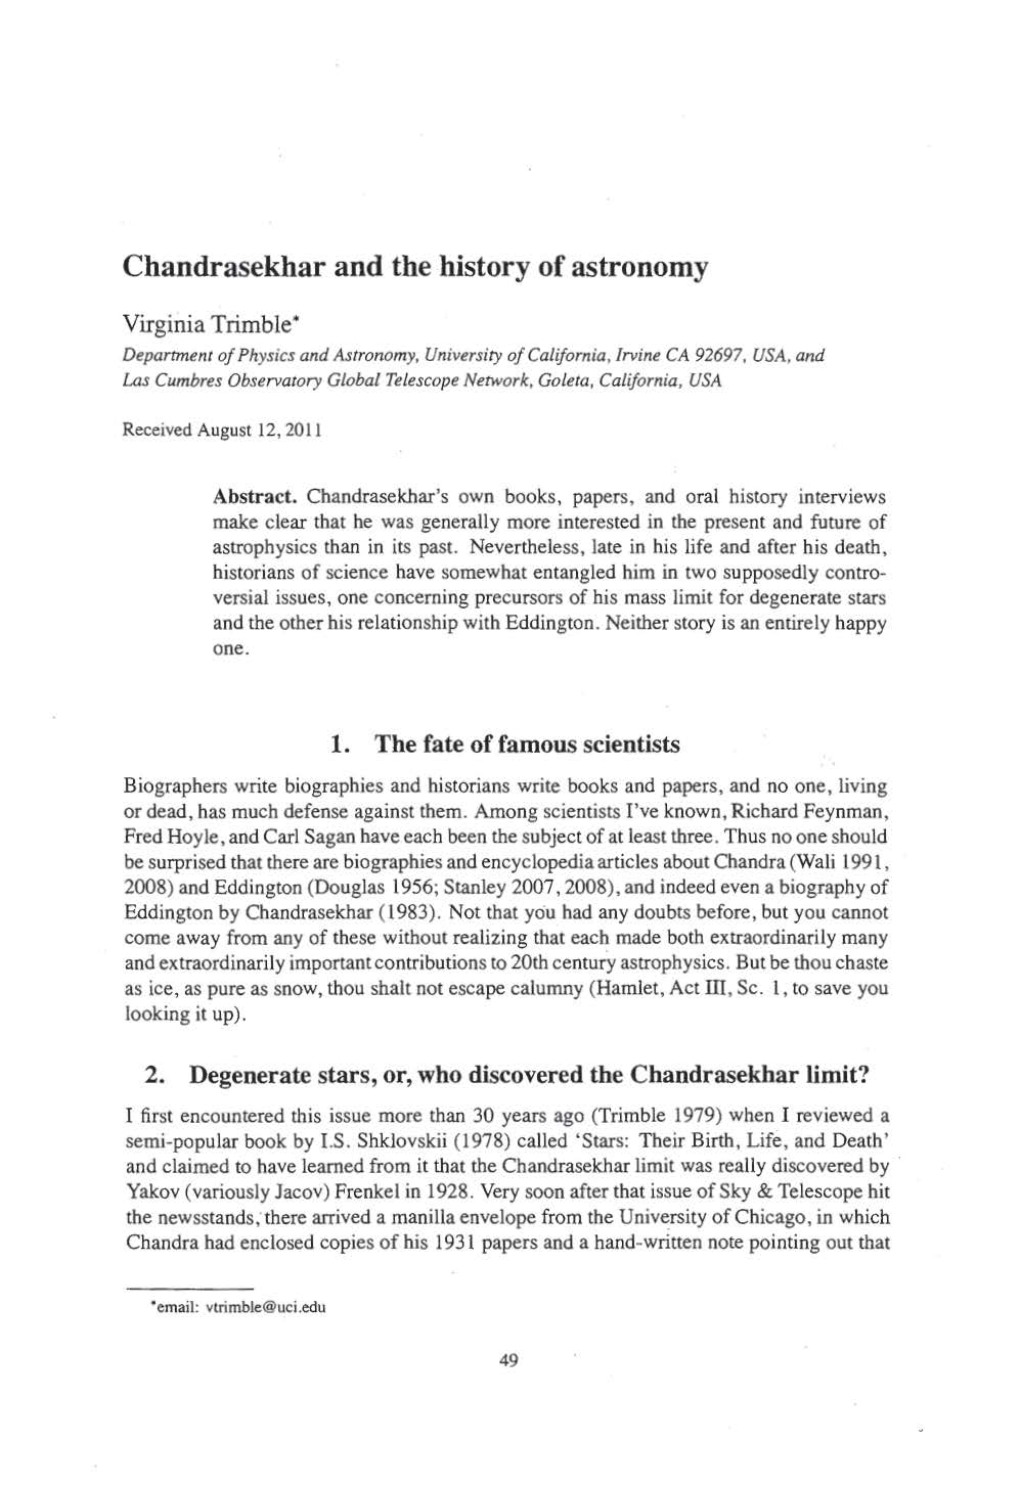 Chandrasekhar and the History of Astronomy